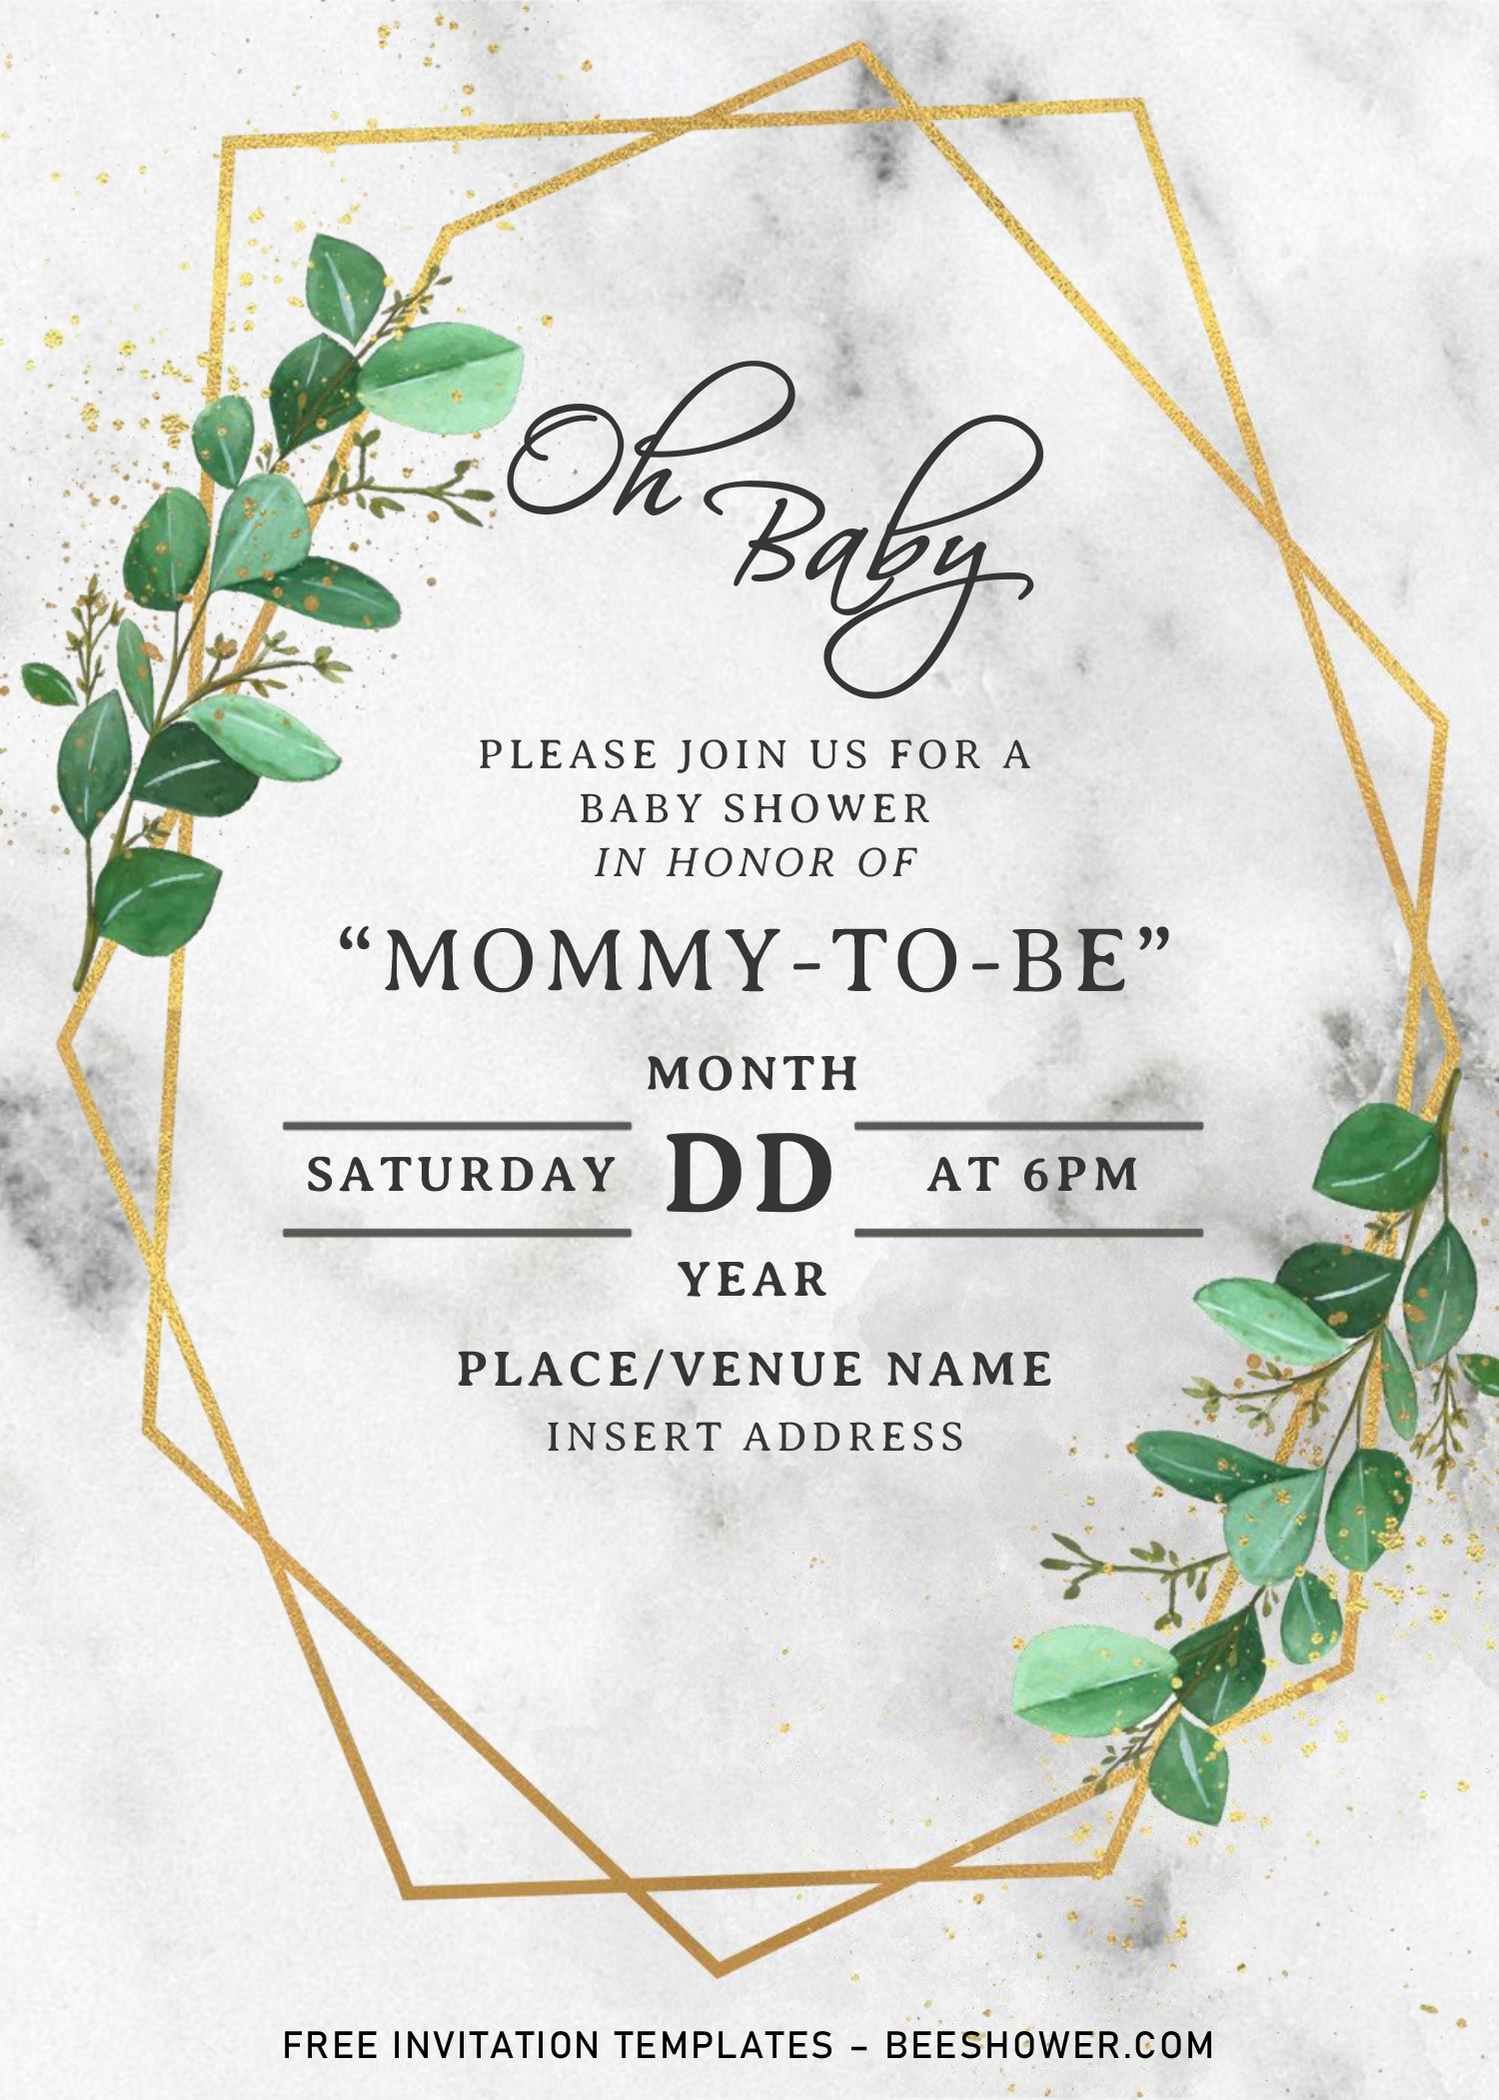 Free Online Printable Wedding Invitations Cards For Baby Shower